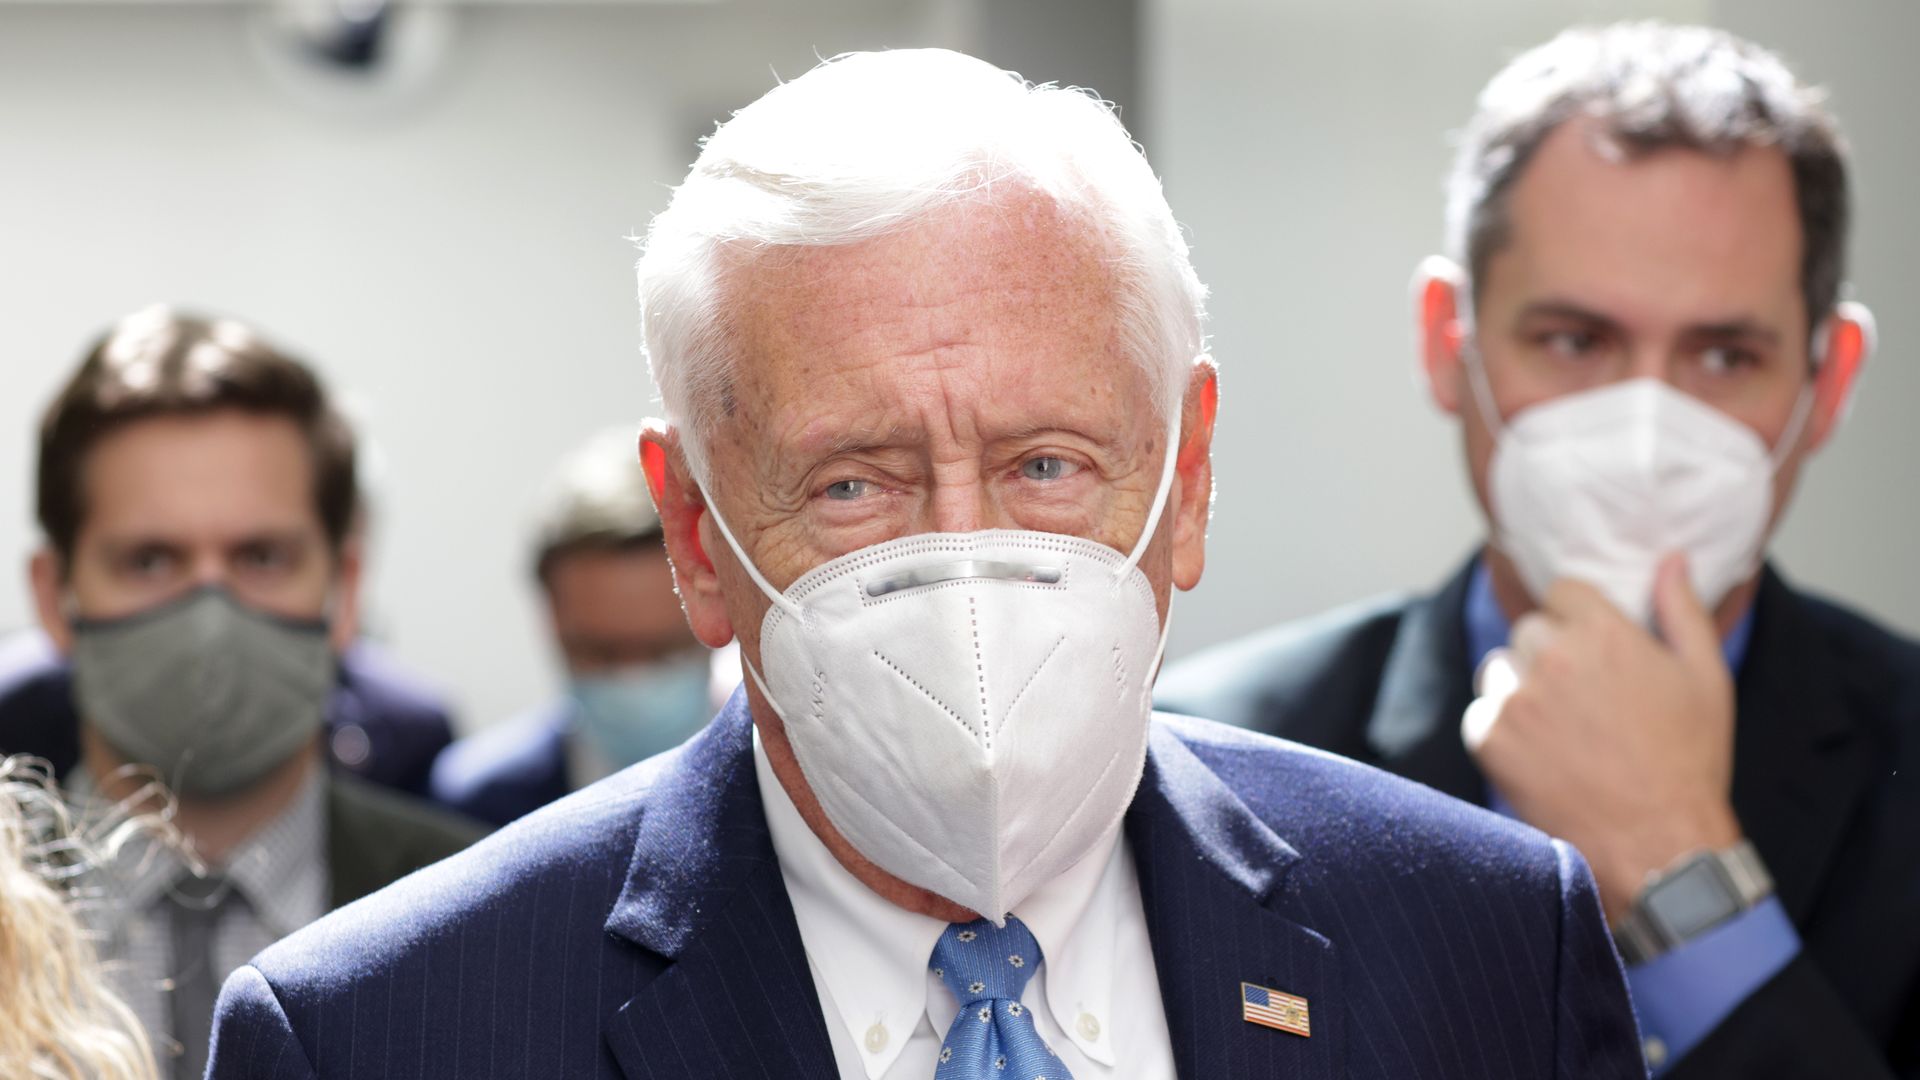 Photo of Steny Hoyer wearing a mask as he is surrounded by staffers